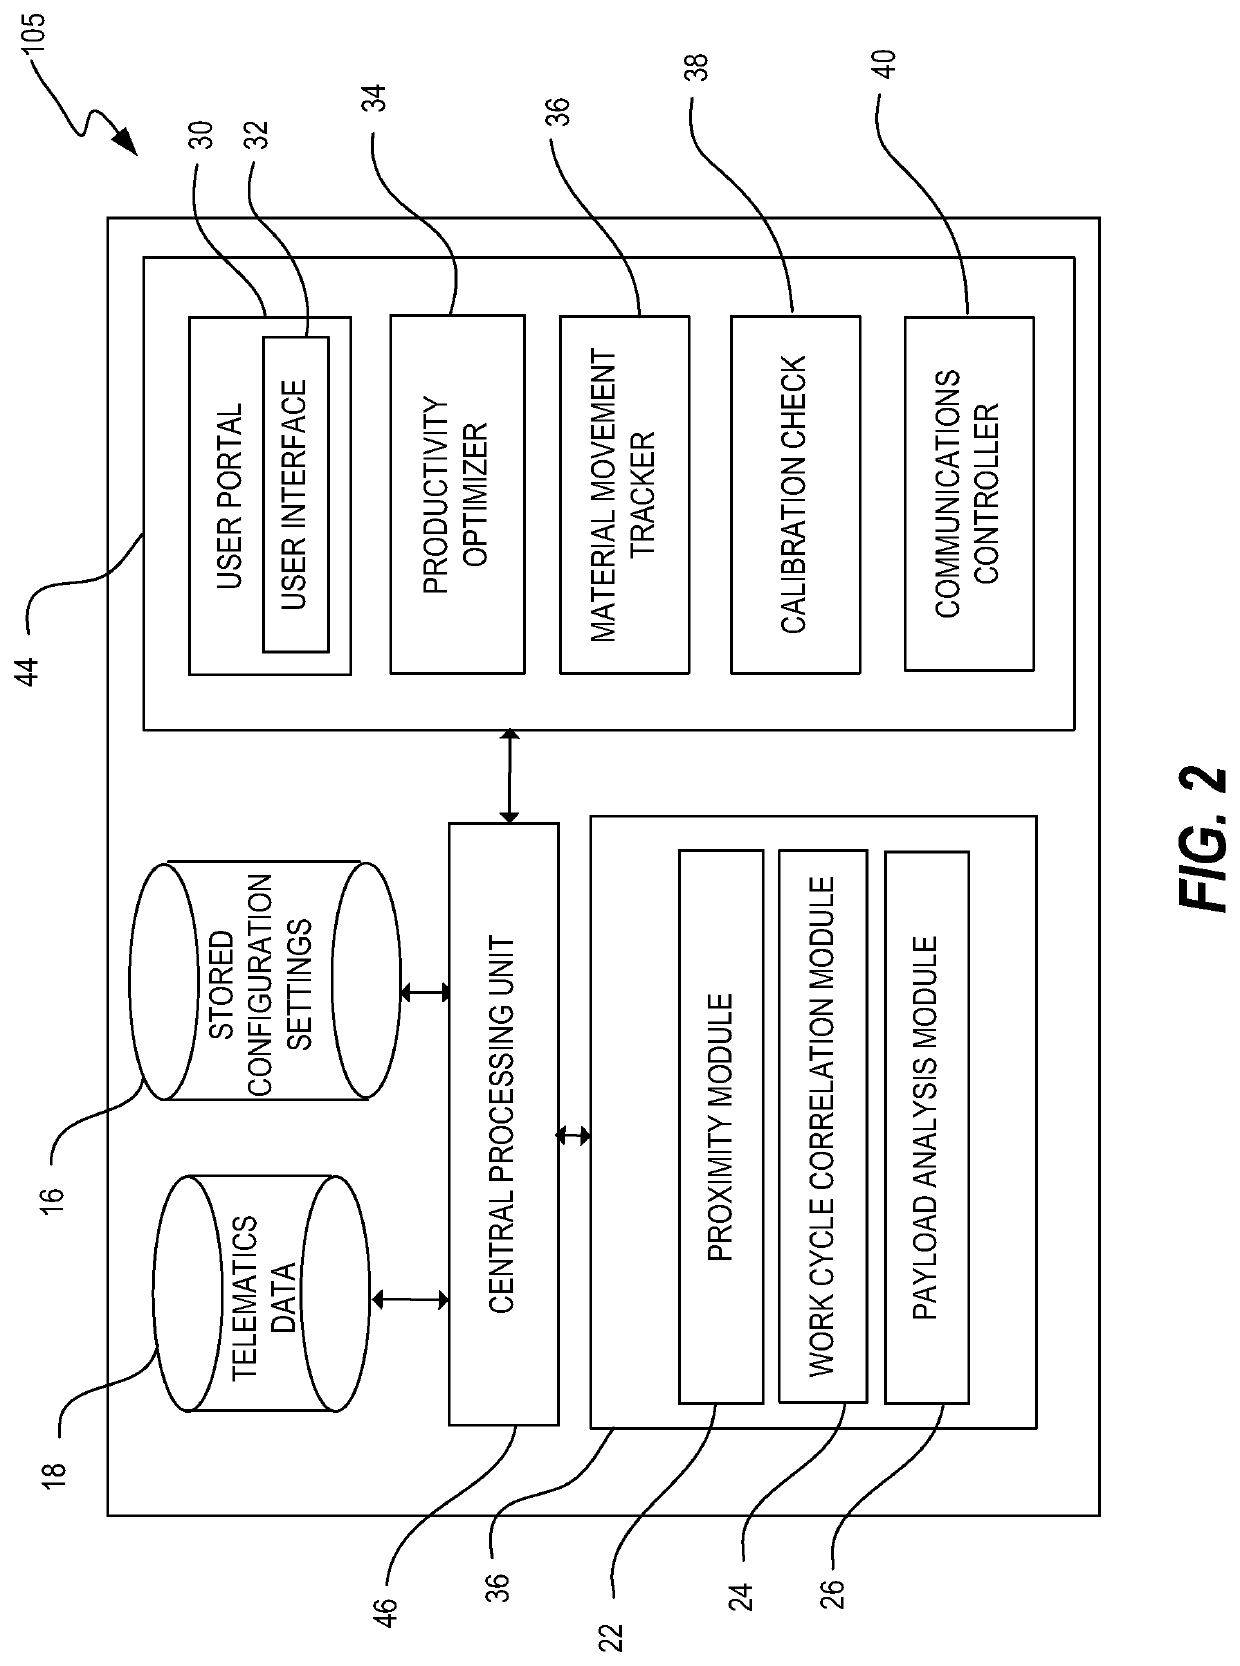 Project management systems and methods incorporating proximity-based association